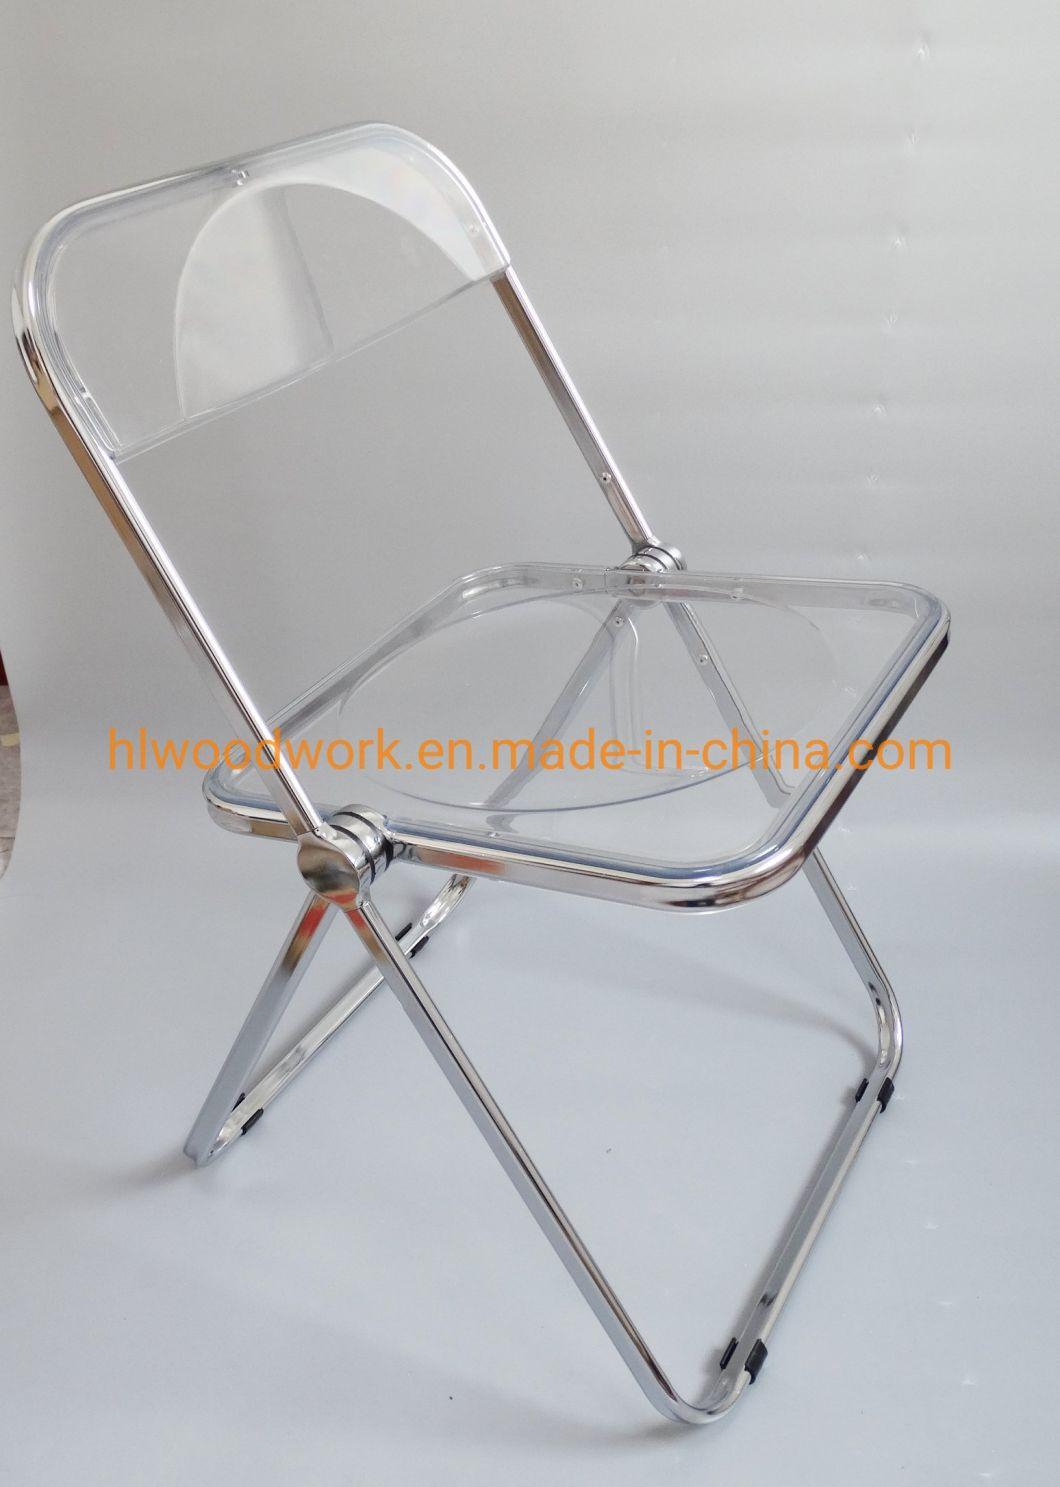 Modern Transparent Brown Folding Chair PC Plastic Hotel Chairt Chrome Frame Office Bar Dining Leisure Banquet Wedding Meeting Chair Plastic Dining Chair